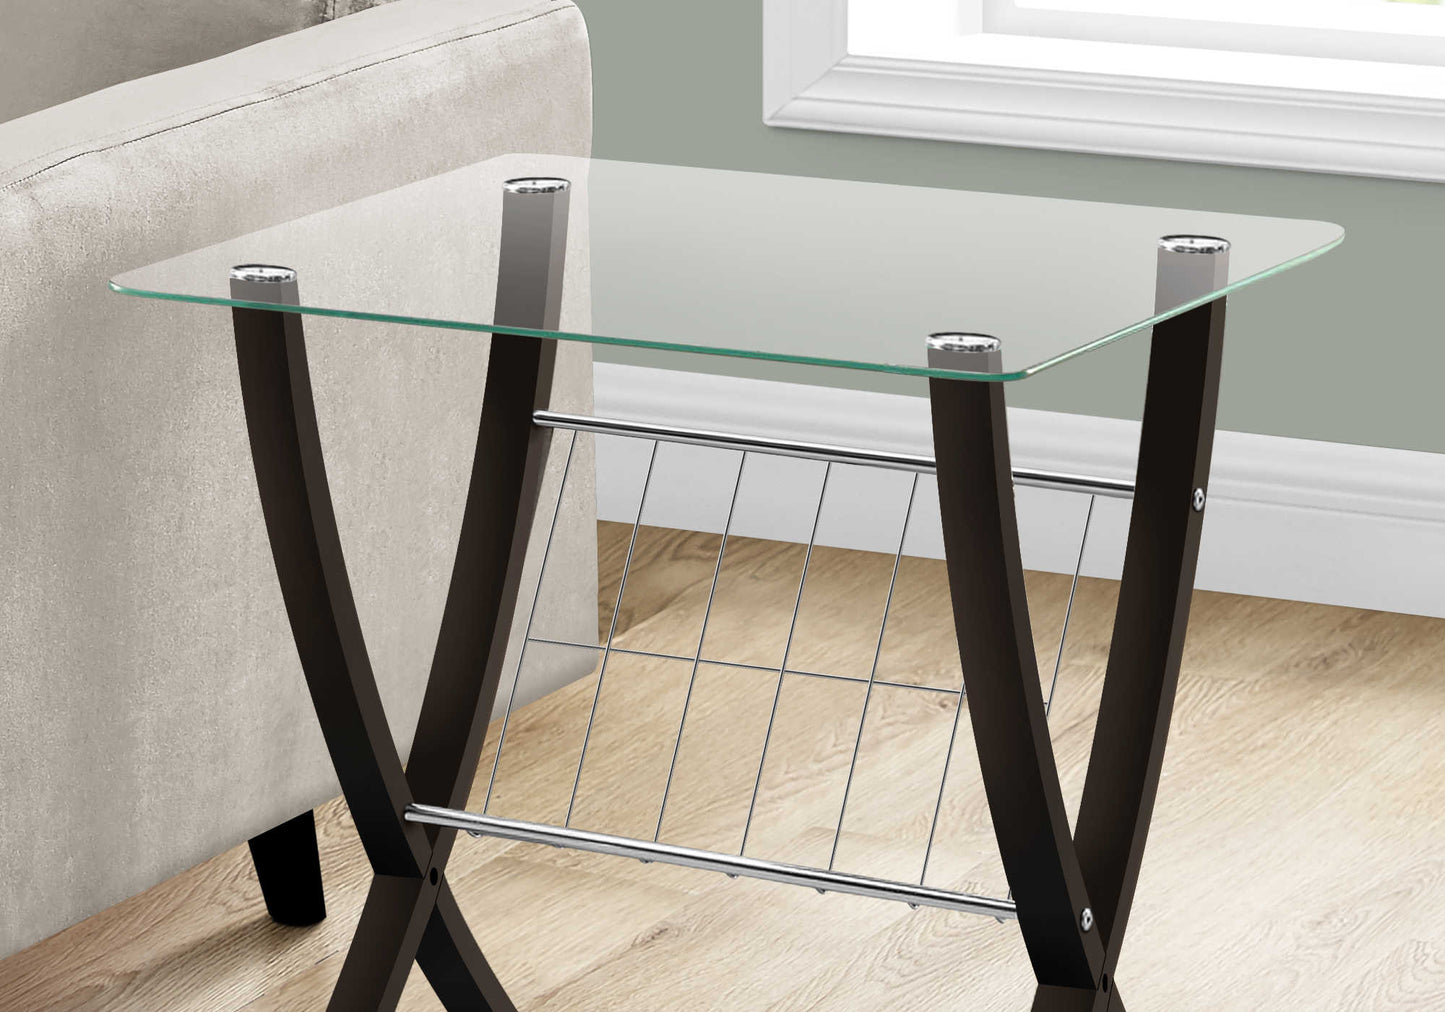 23.75 L/21.5 H Transitional Wood End Table with Wire Magazine Rack.